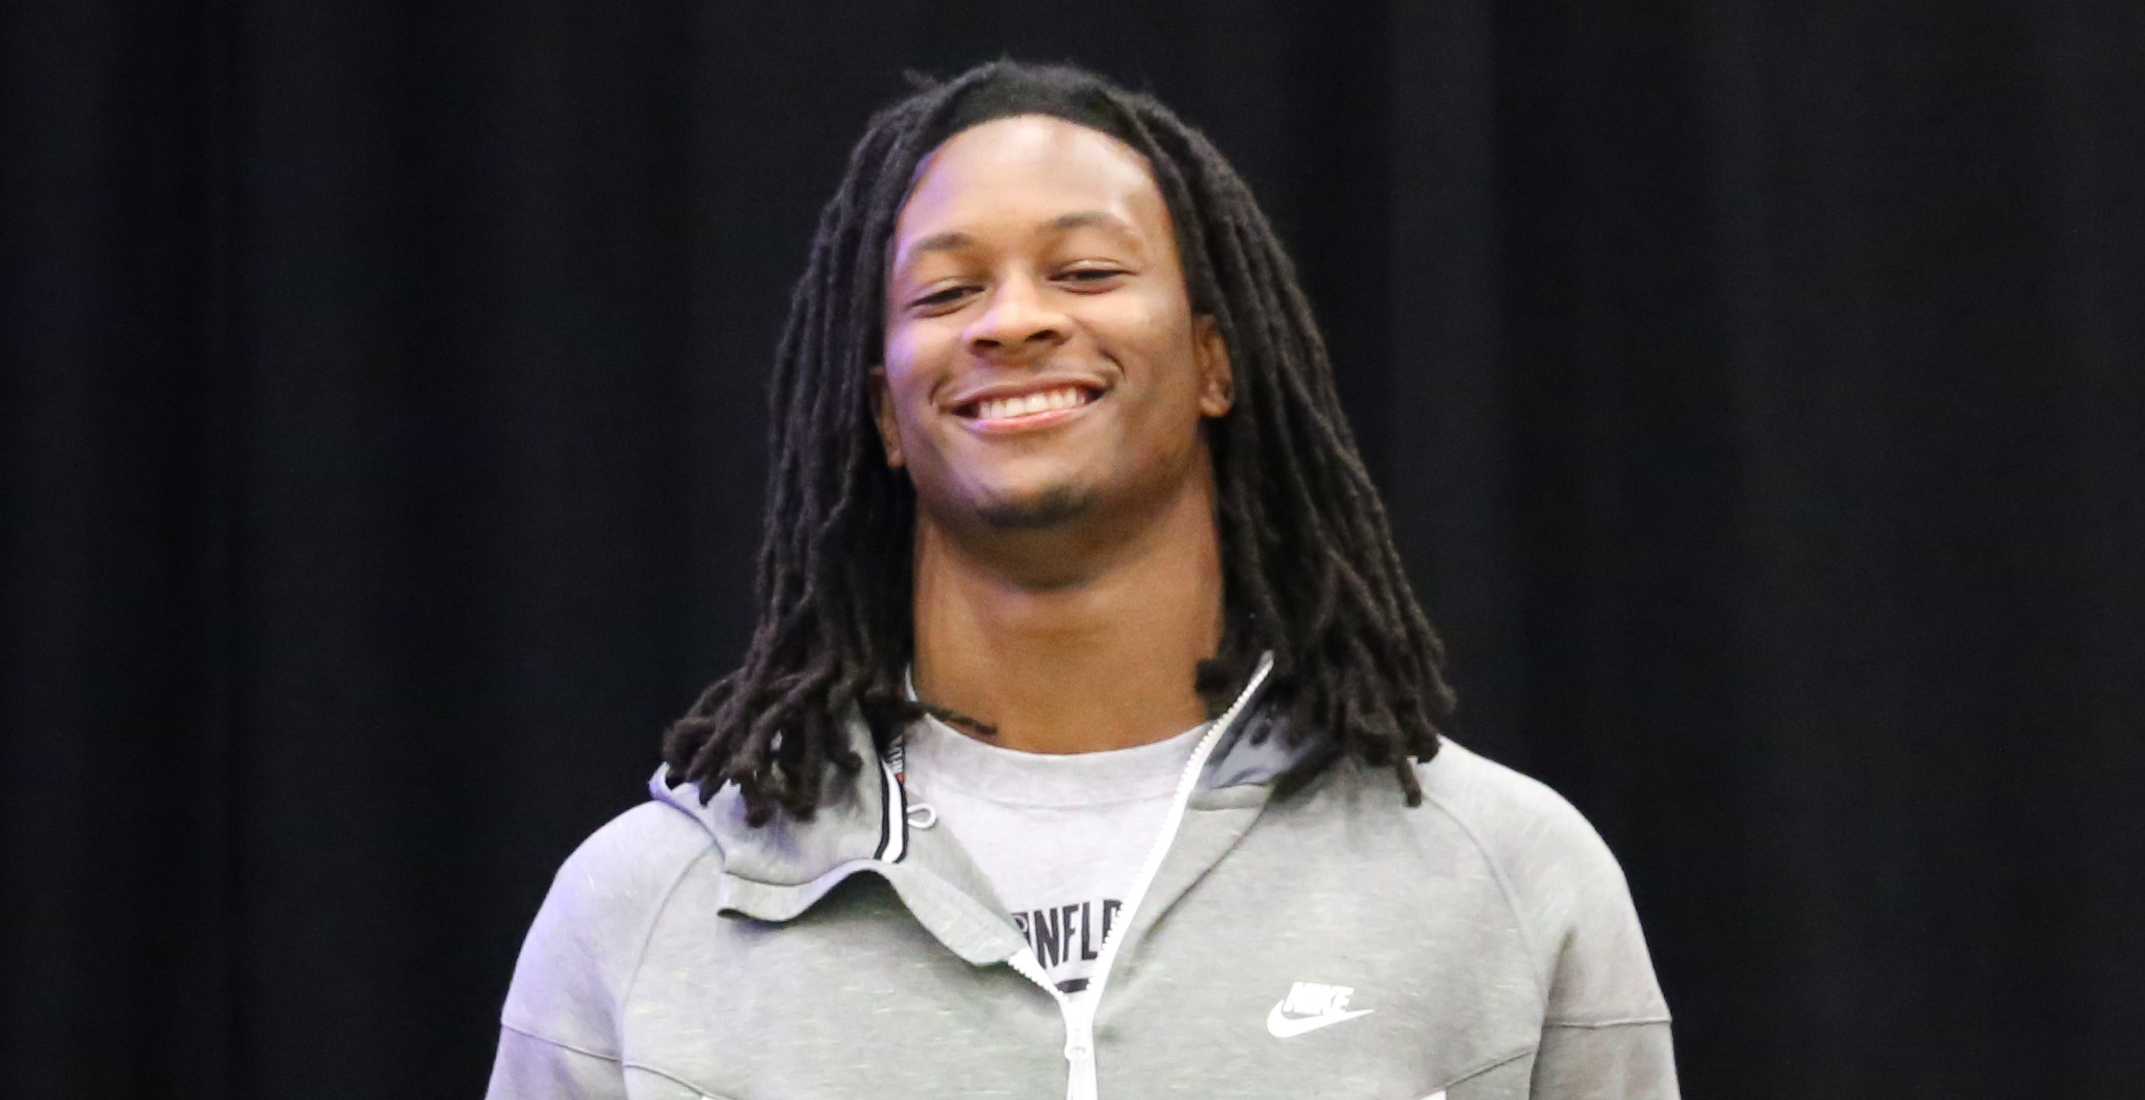 Not in Hall of Fame - Todd Gurley